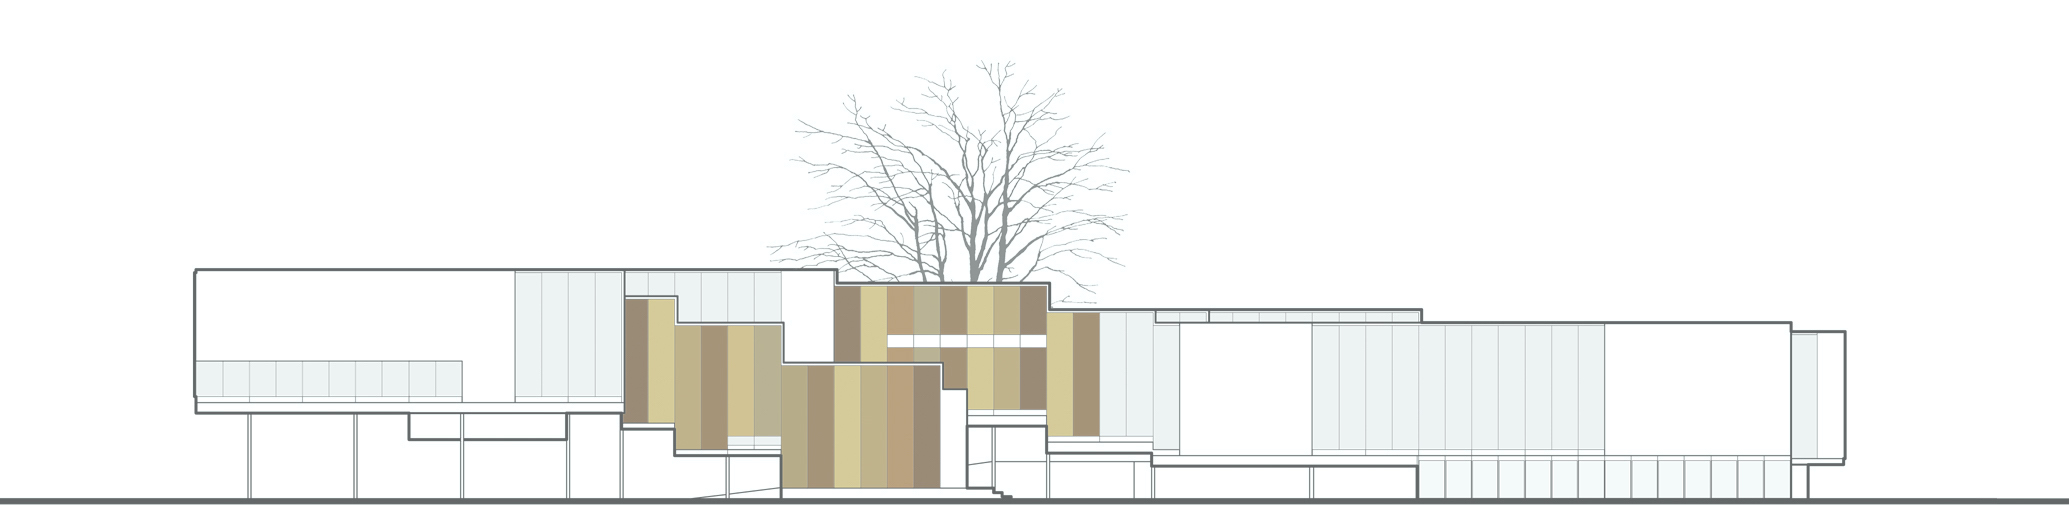 Prefab_Community_Center_ElevationSection